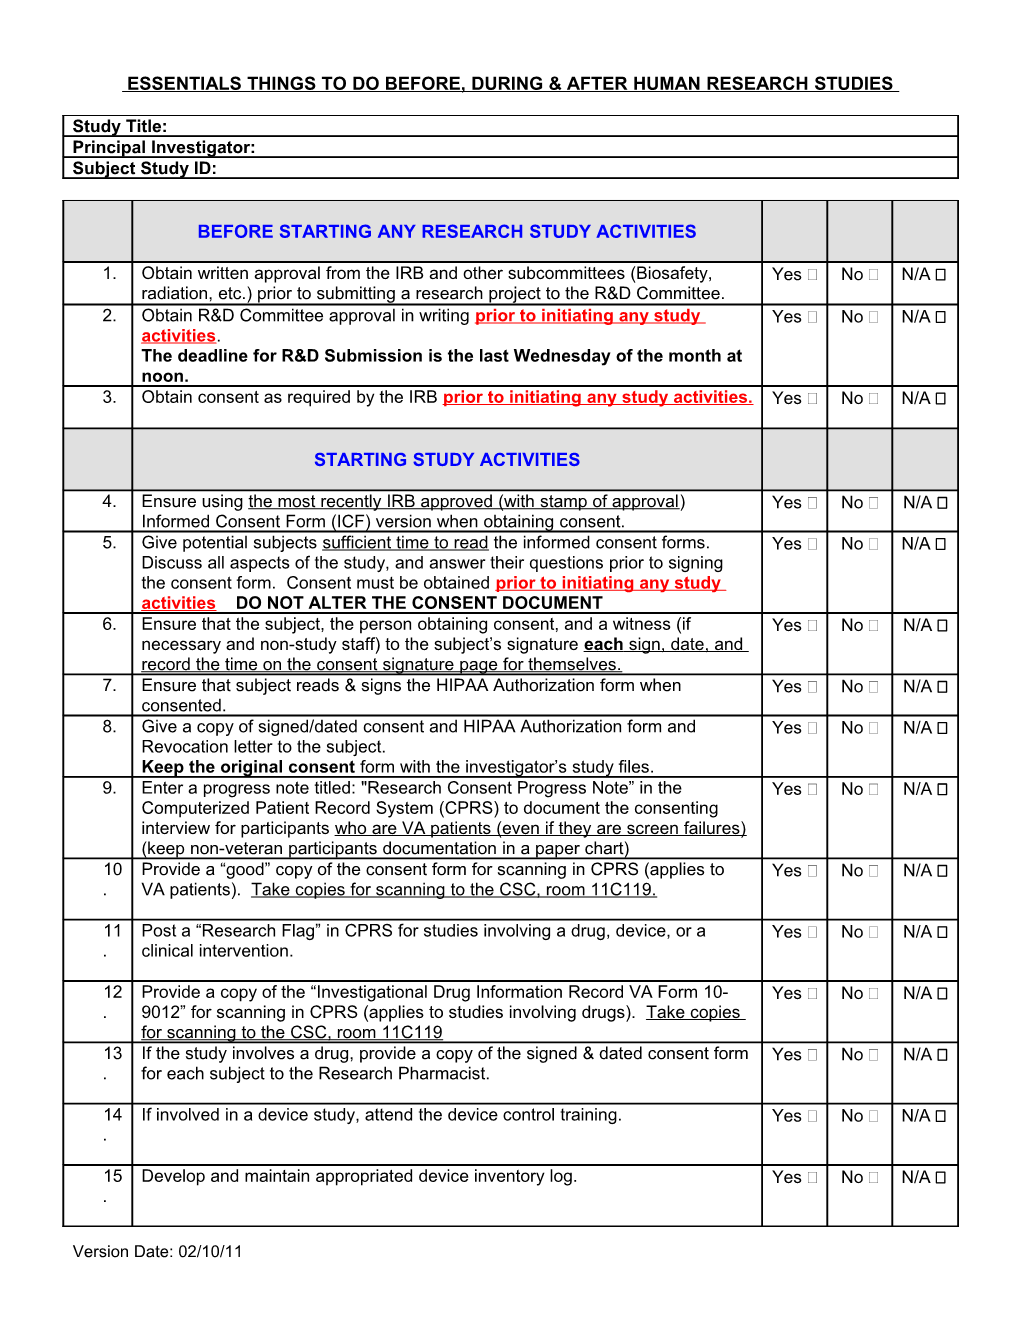 Research Study Activities Checklist